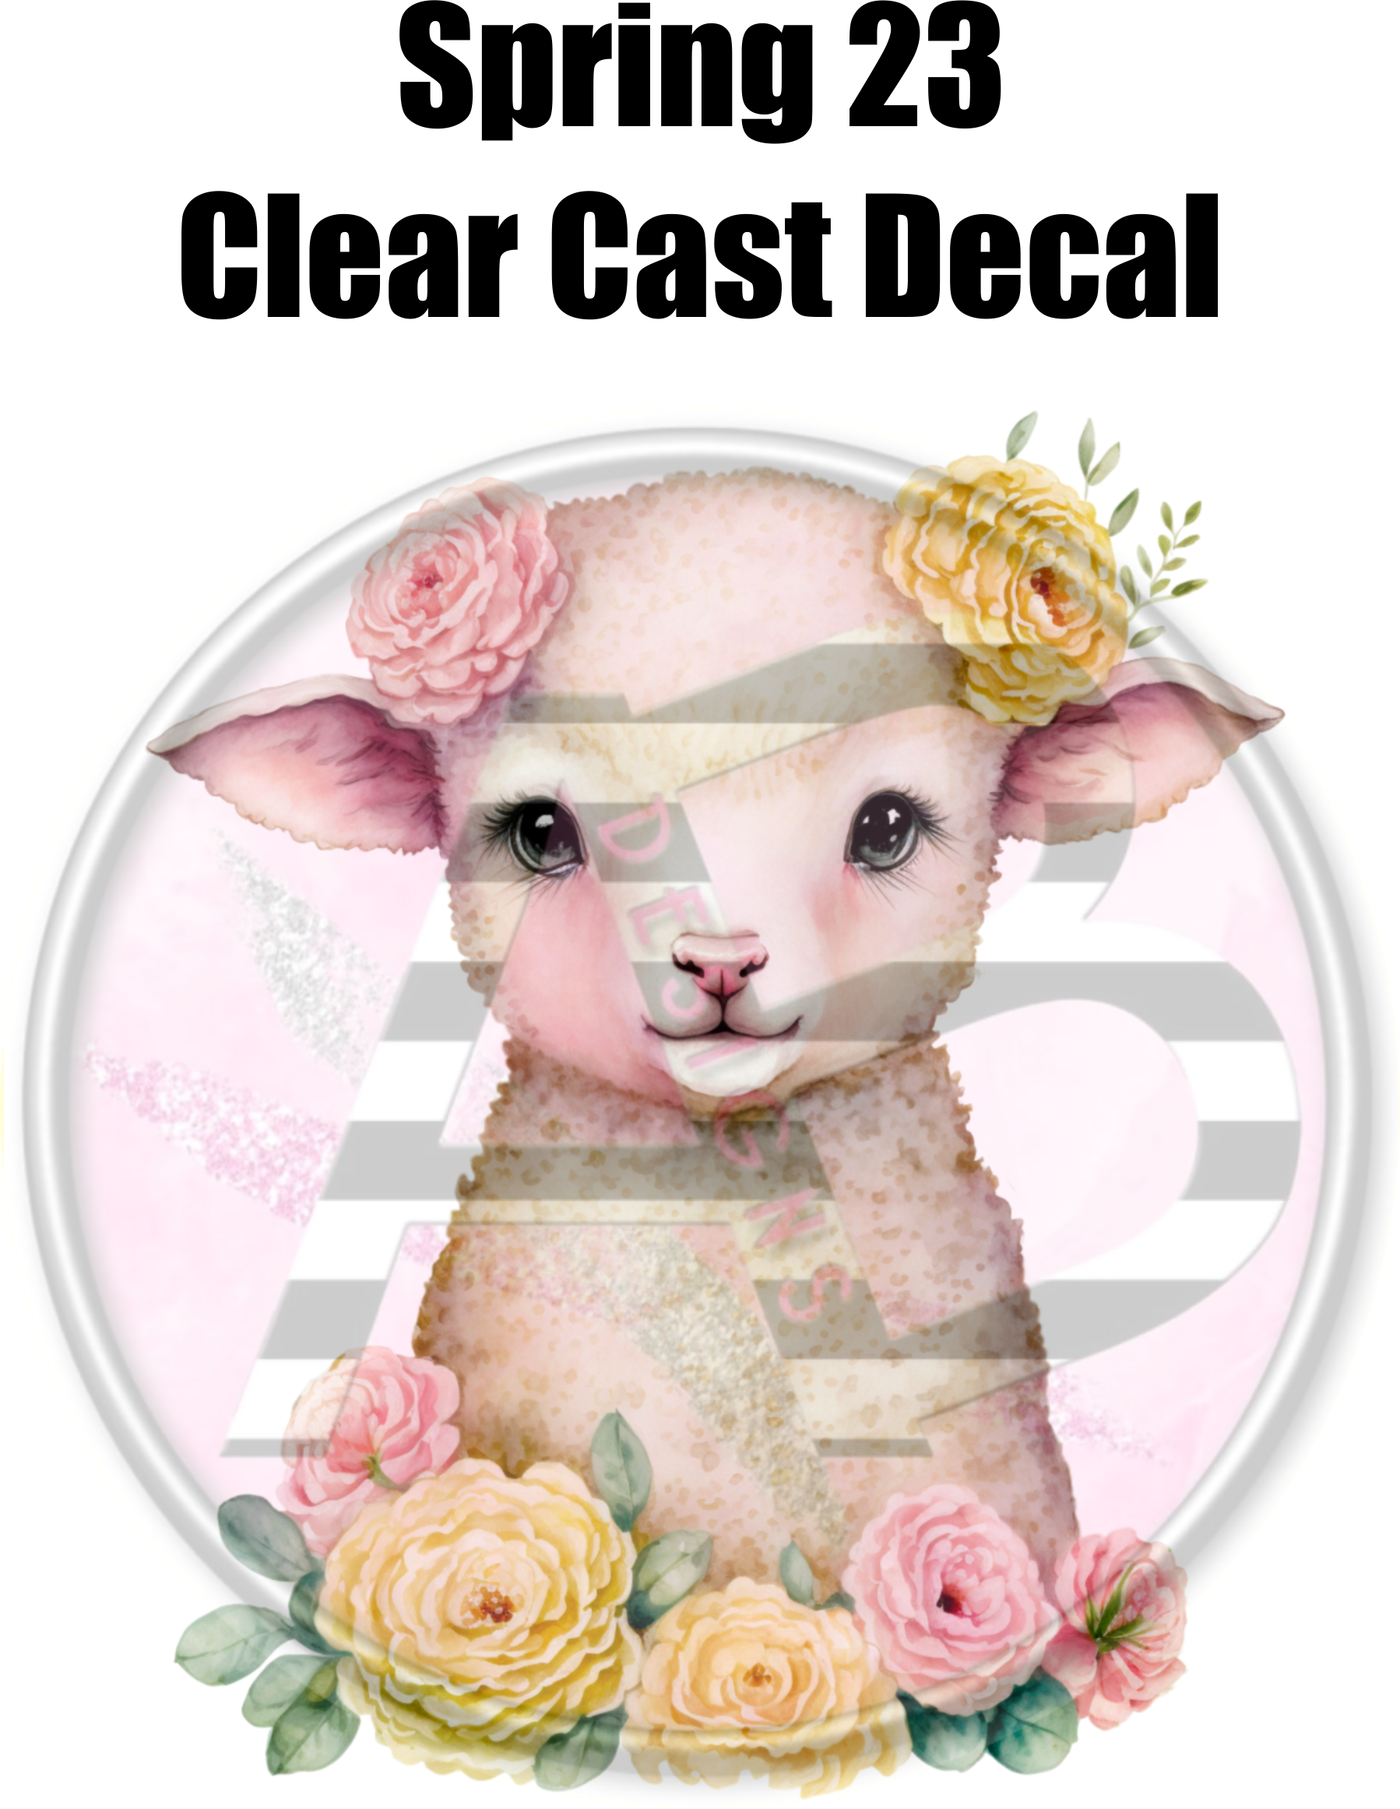 Spring 23 - Clear Cast Decal